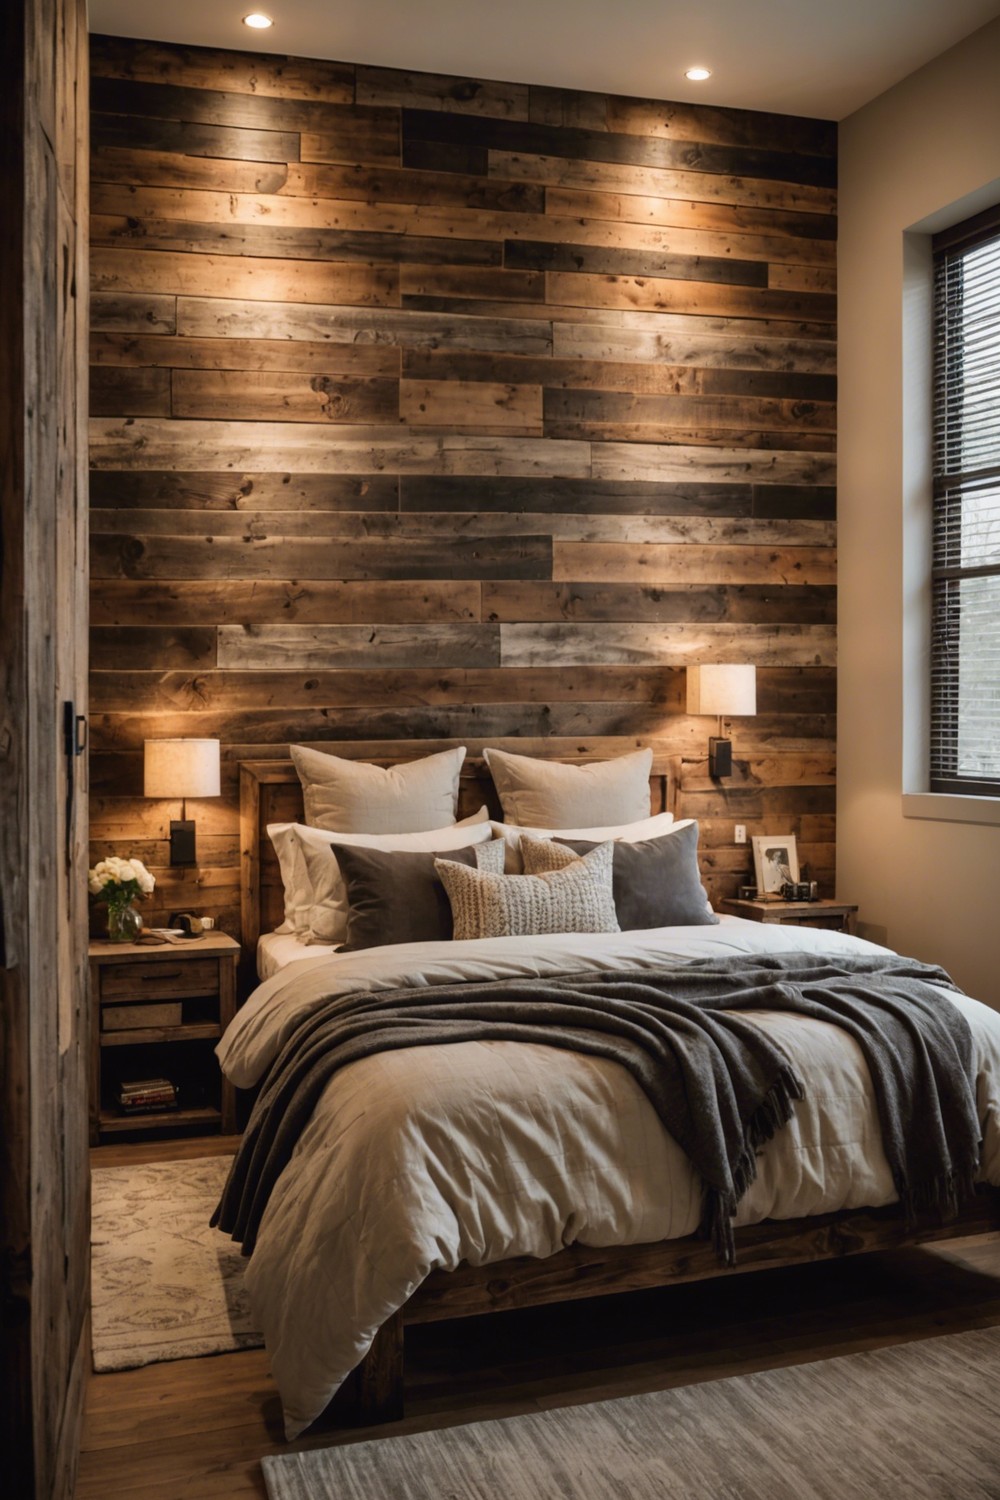 Reclaimed Wood Accents